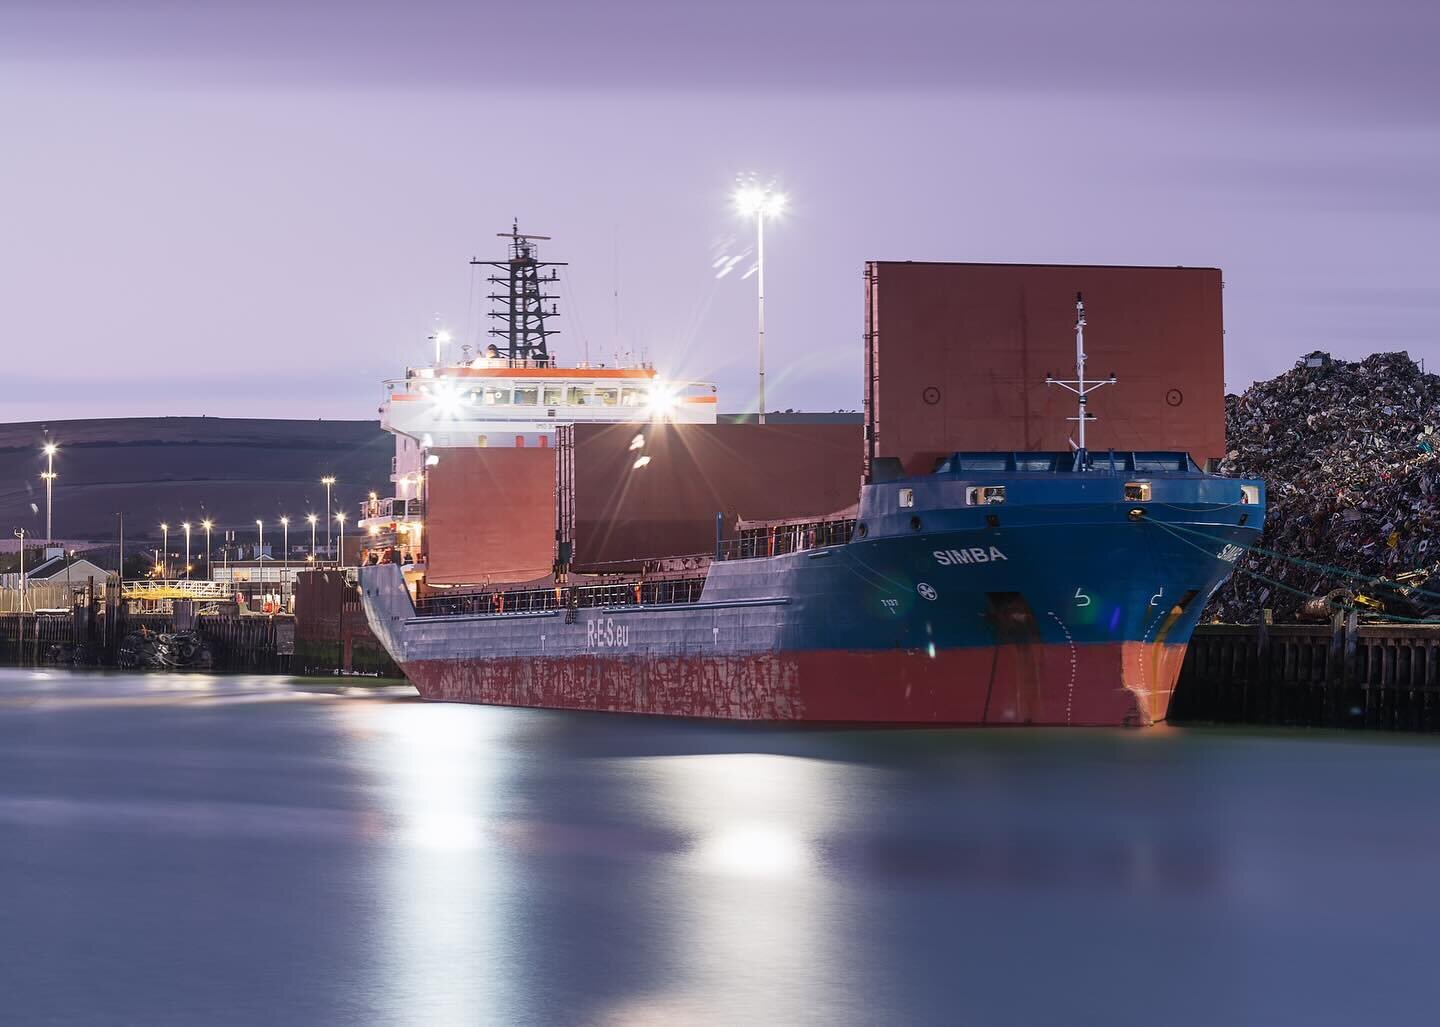 General cargo ship Simba in Newhaven Port&rsquo;s East Quay, East Sussex (2020). 

I think it is a time to get back to night photography this autumn and winter.

#eastsussex #newhaven #port #harbour #sea #coast #quay #barge #vessel #ship #simba #expl